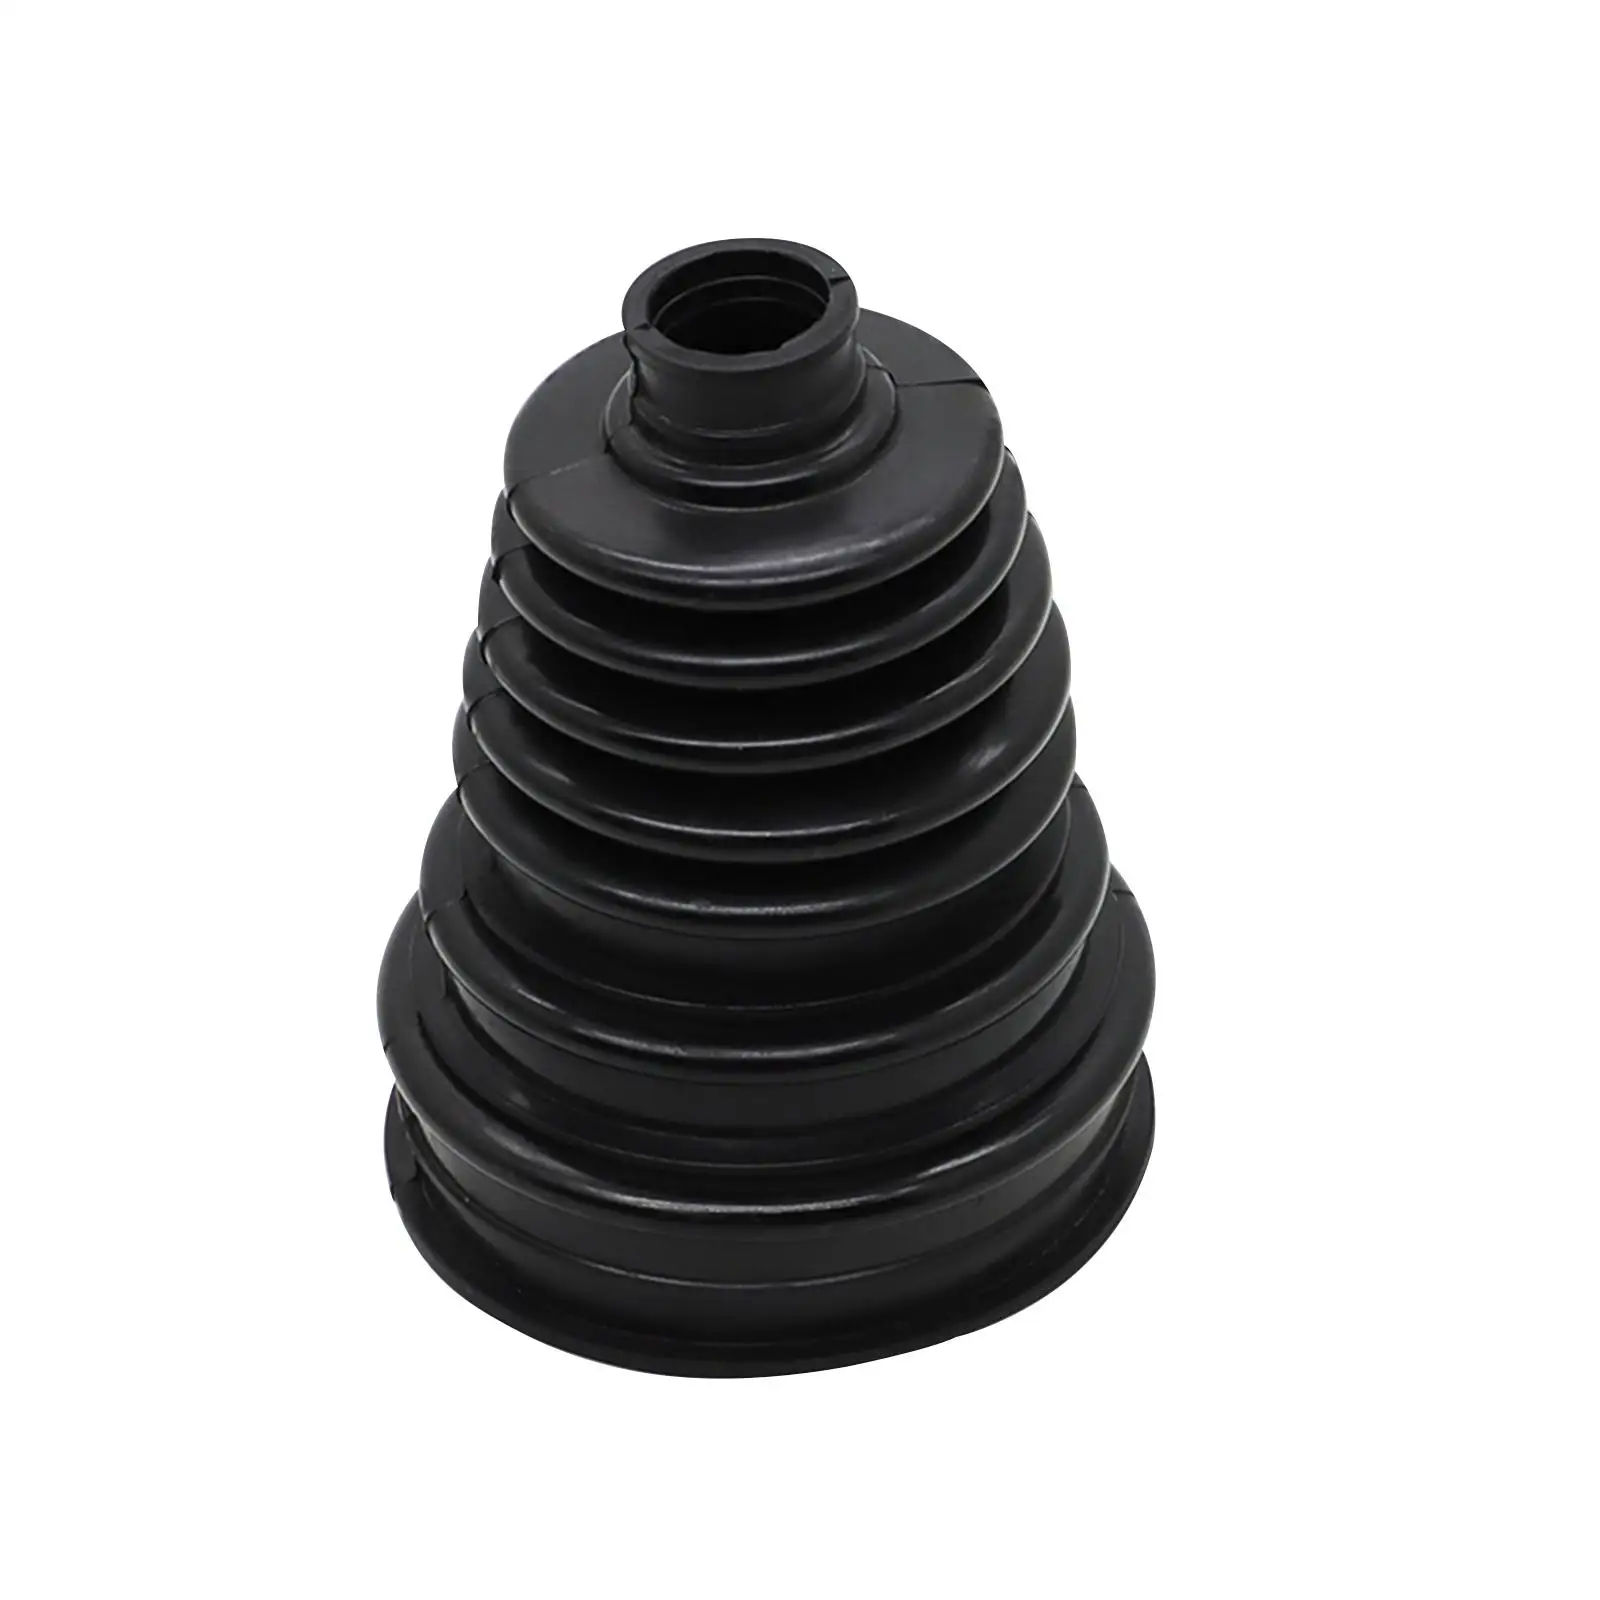 Car CV Joint Boot Dust Rubber Durable Adjustable Easy to Install for Car